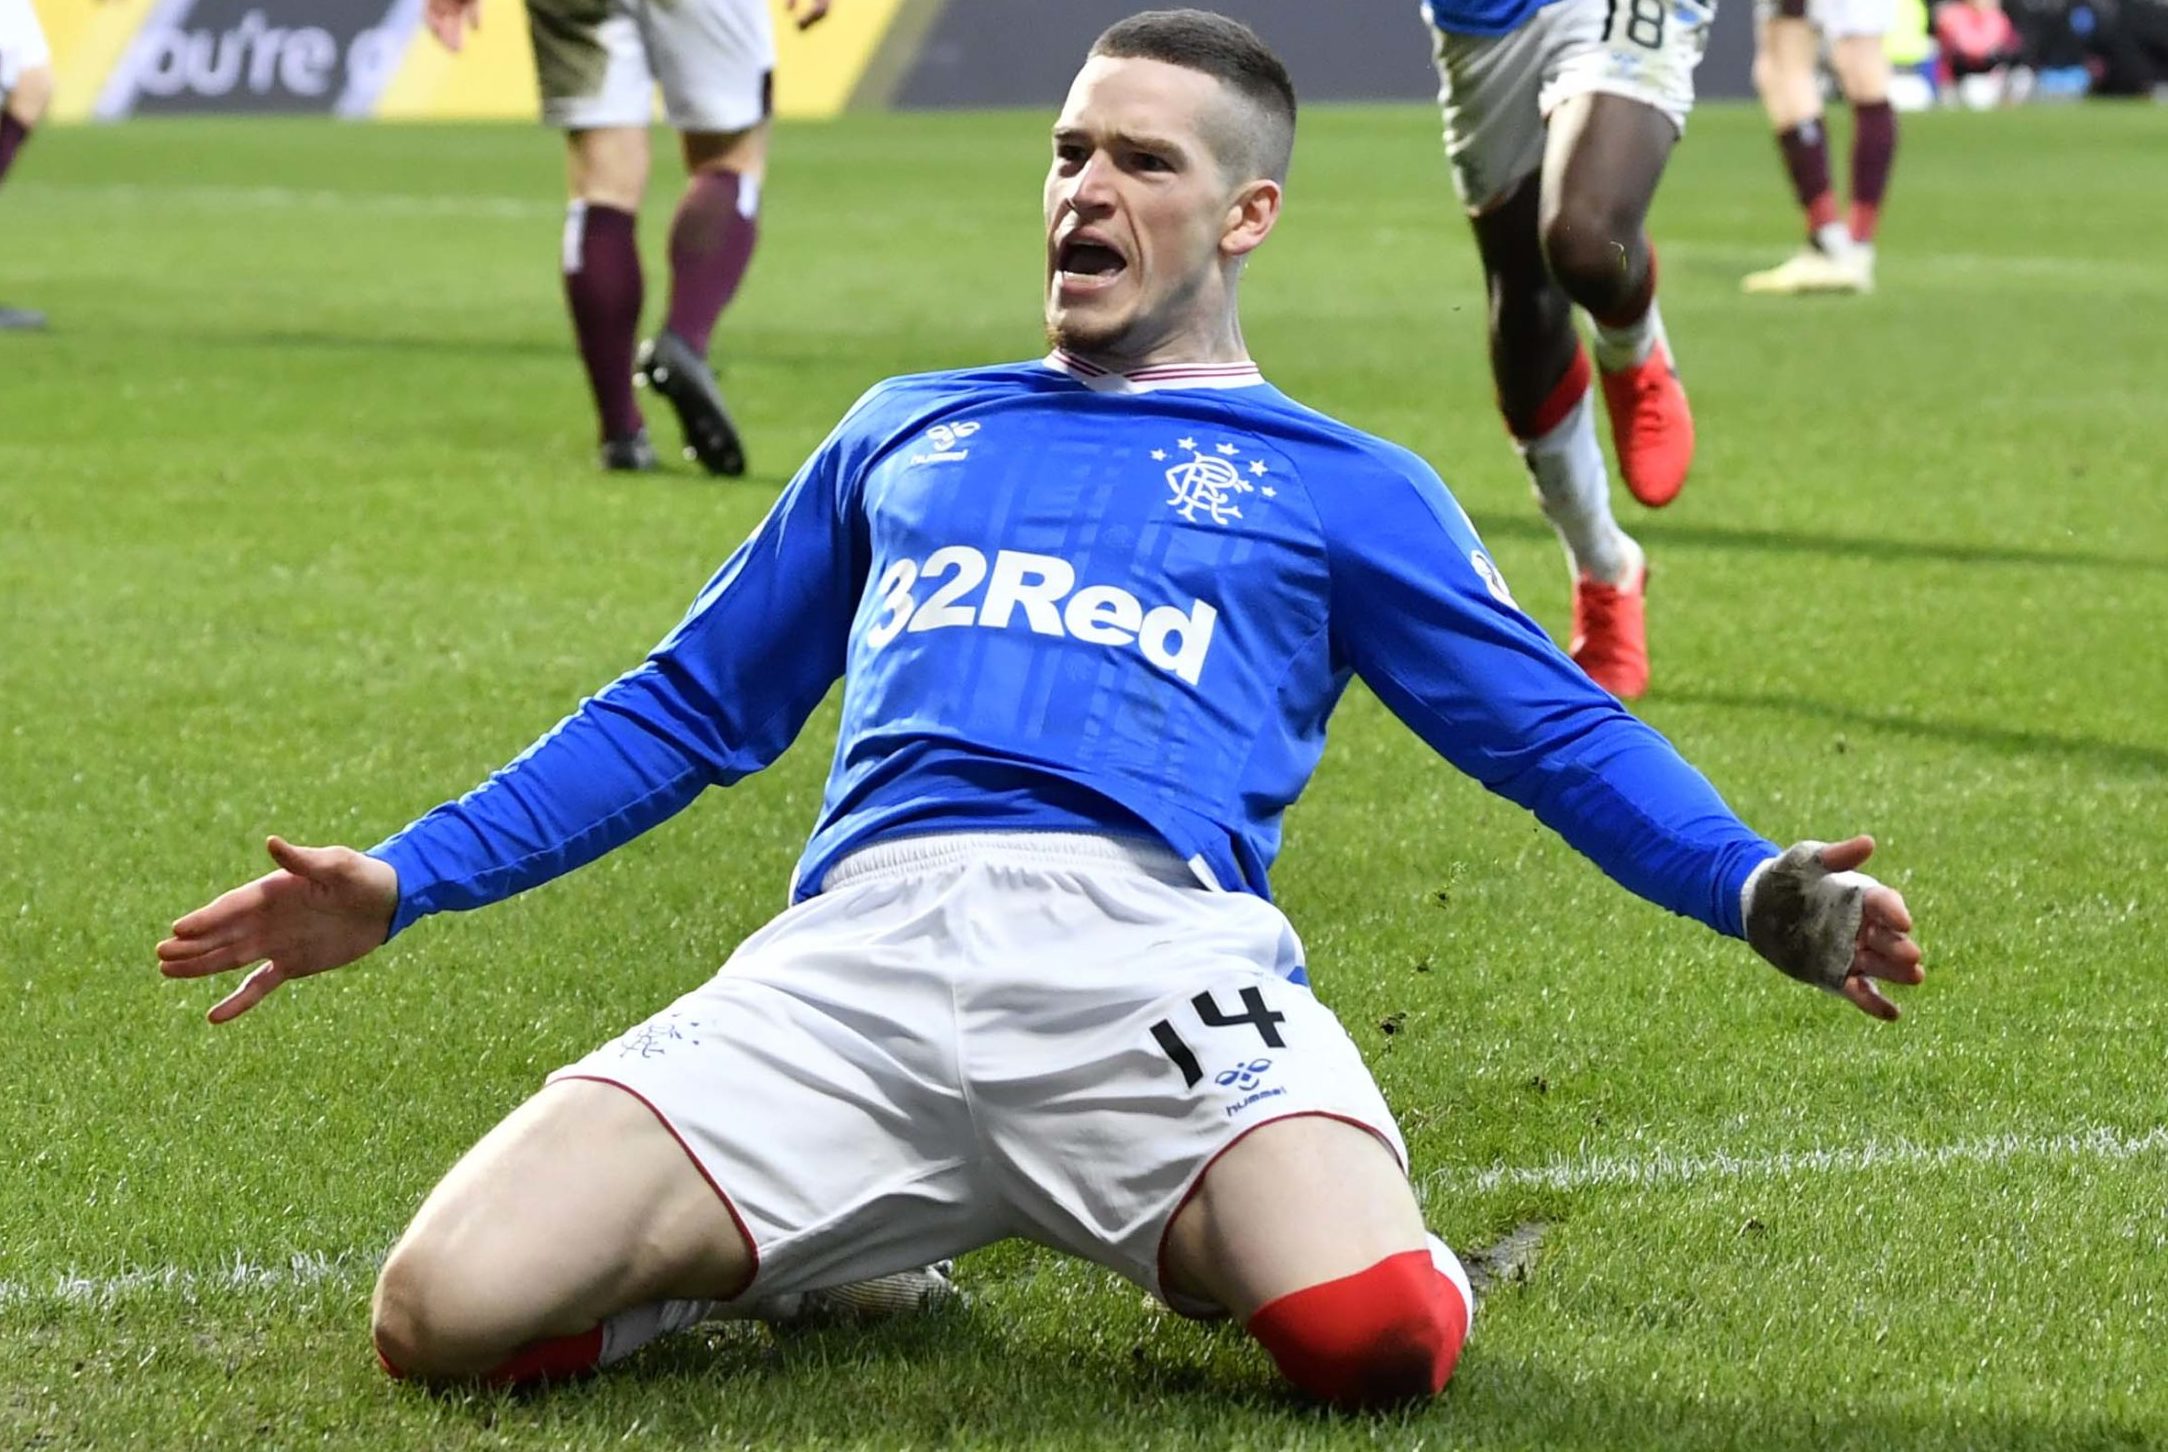 Rangers are expecting more from Ryan Kent